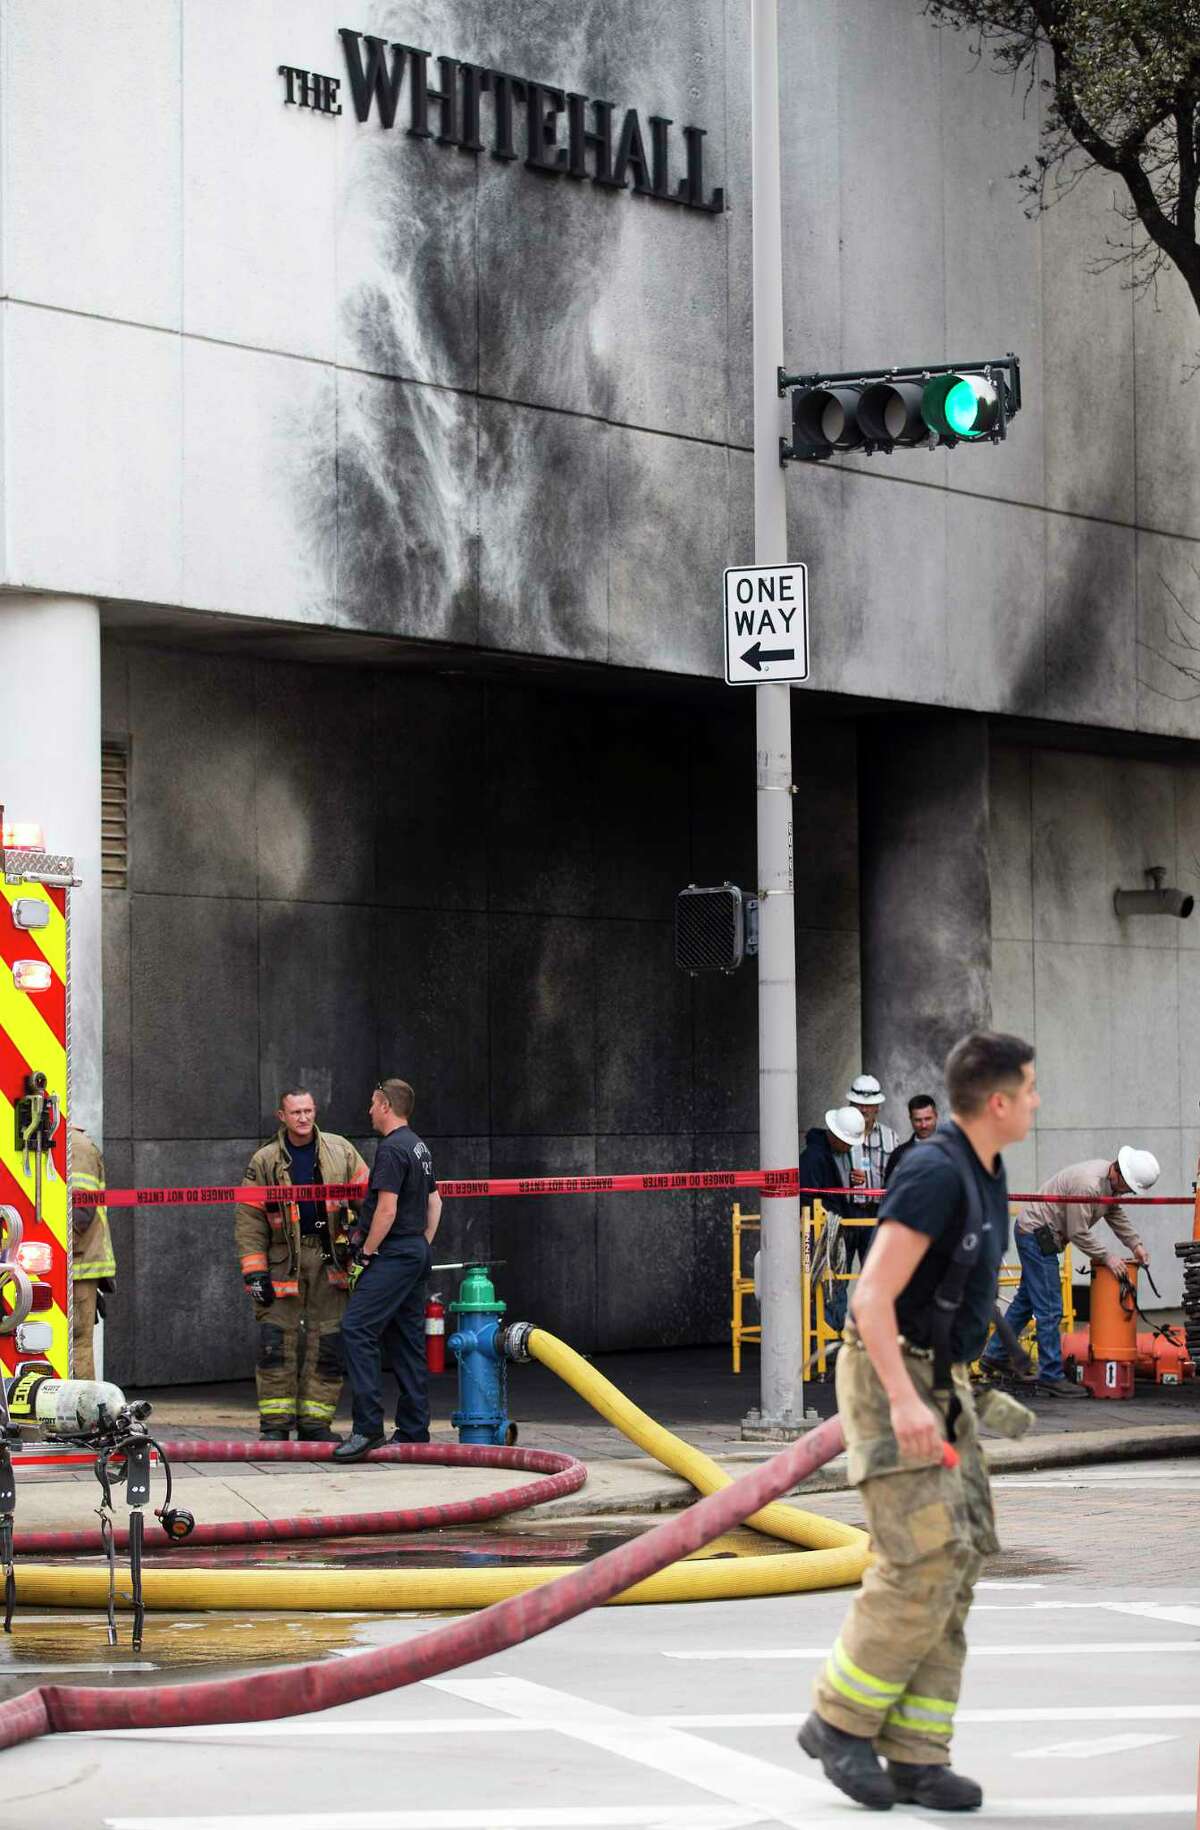 Houston firefighters work the scene of an explosion Friday at The Whitehall Hotel downtown. One person was transported to a hospital with life-threatening injuries, Deputy Chief Blake White said.